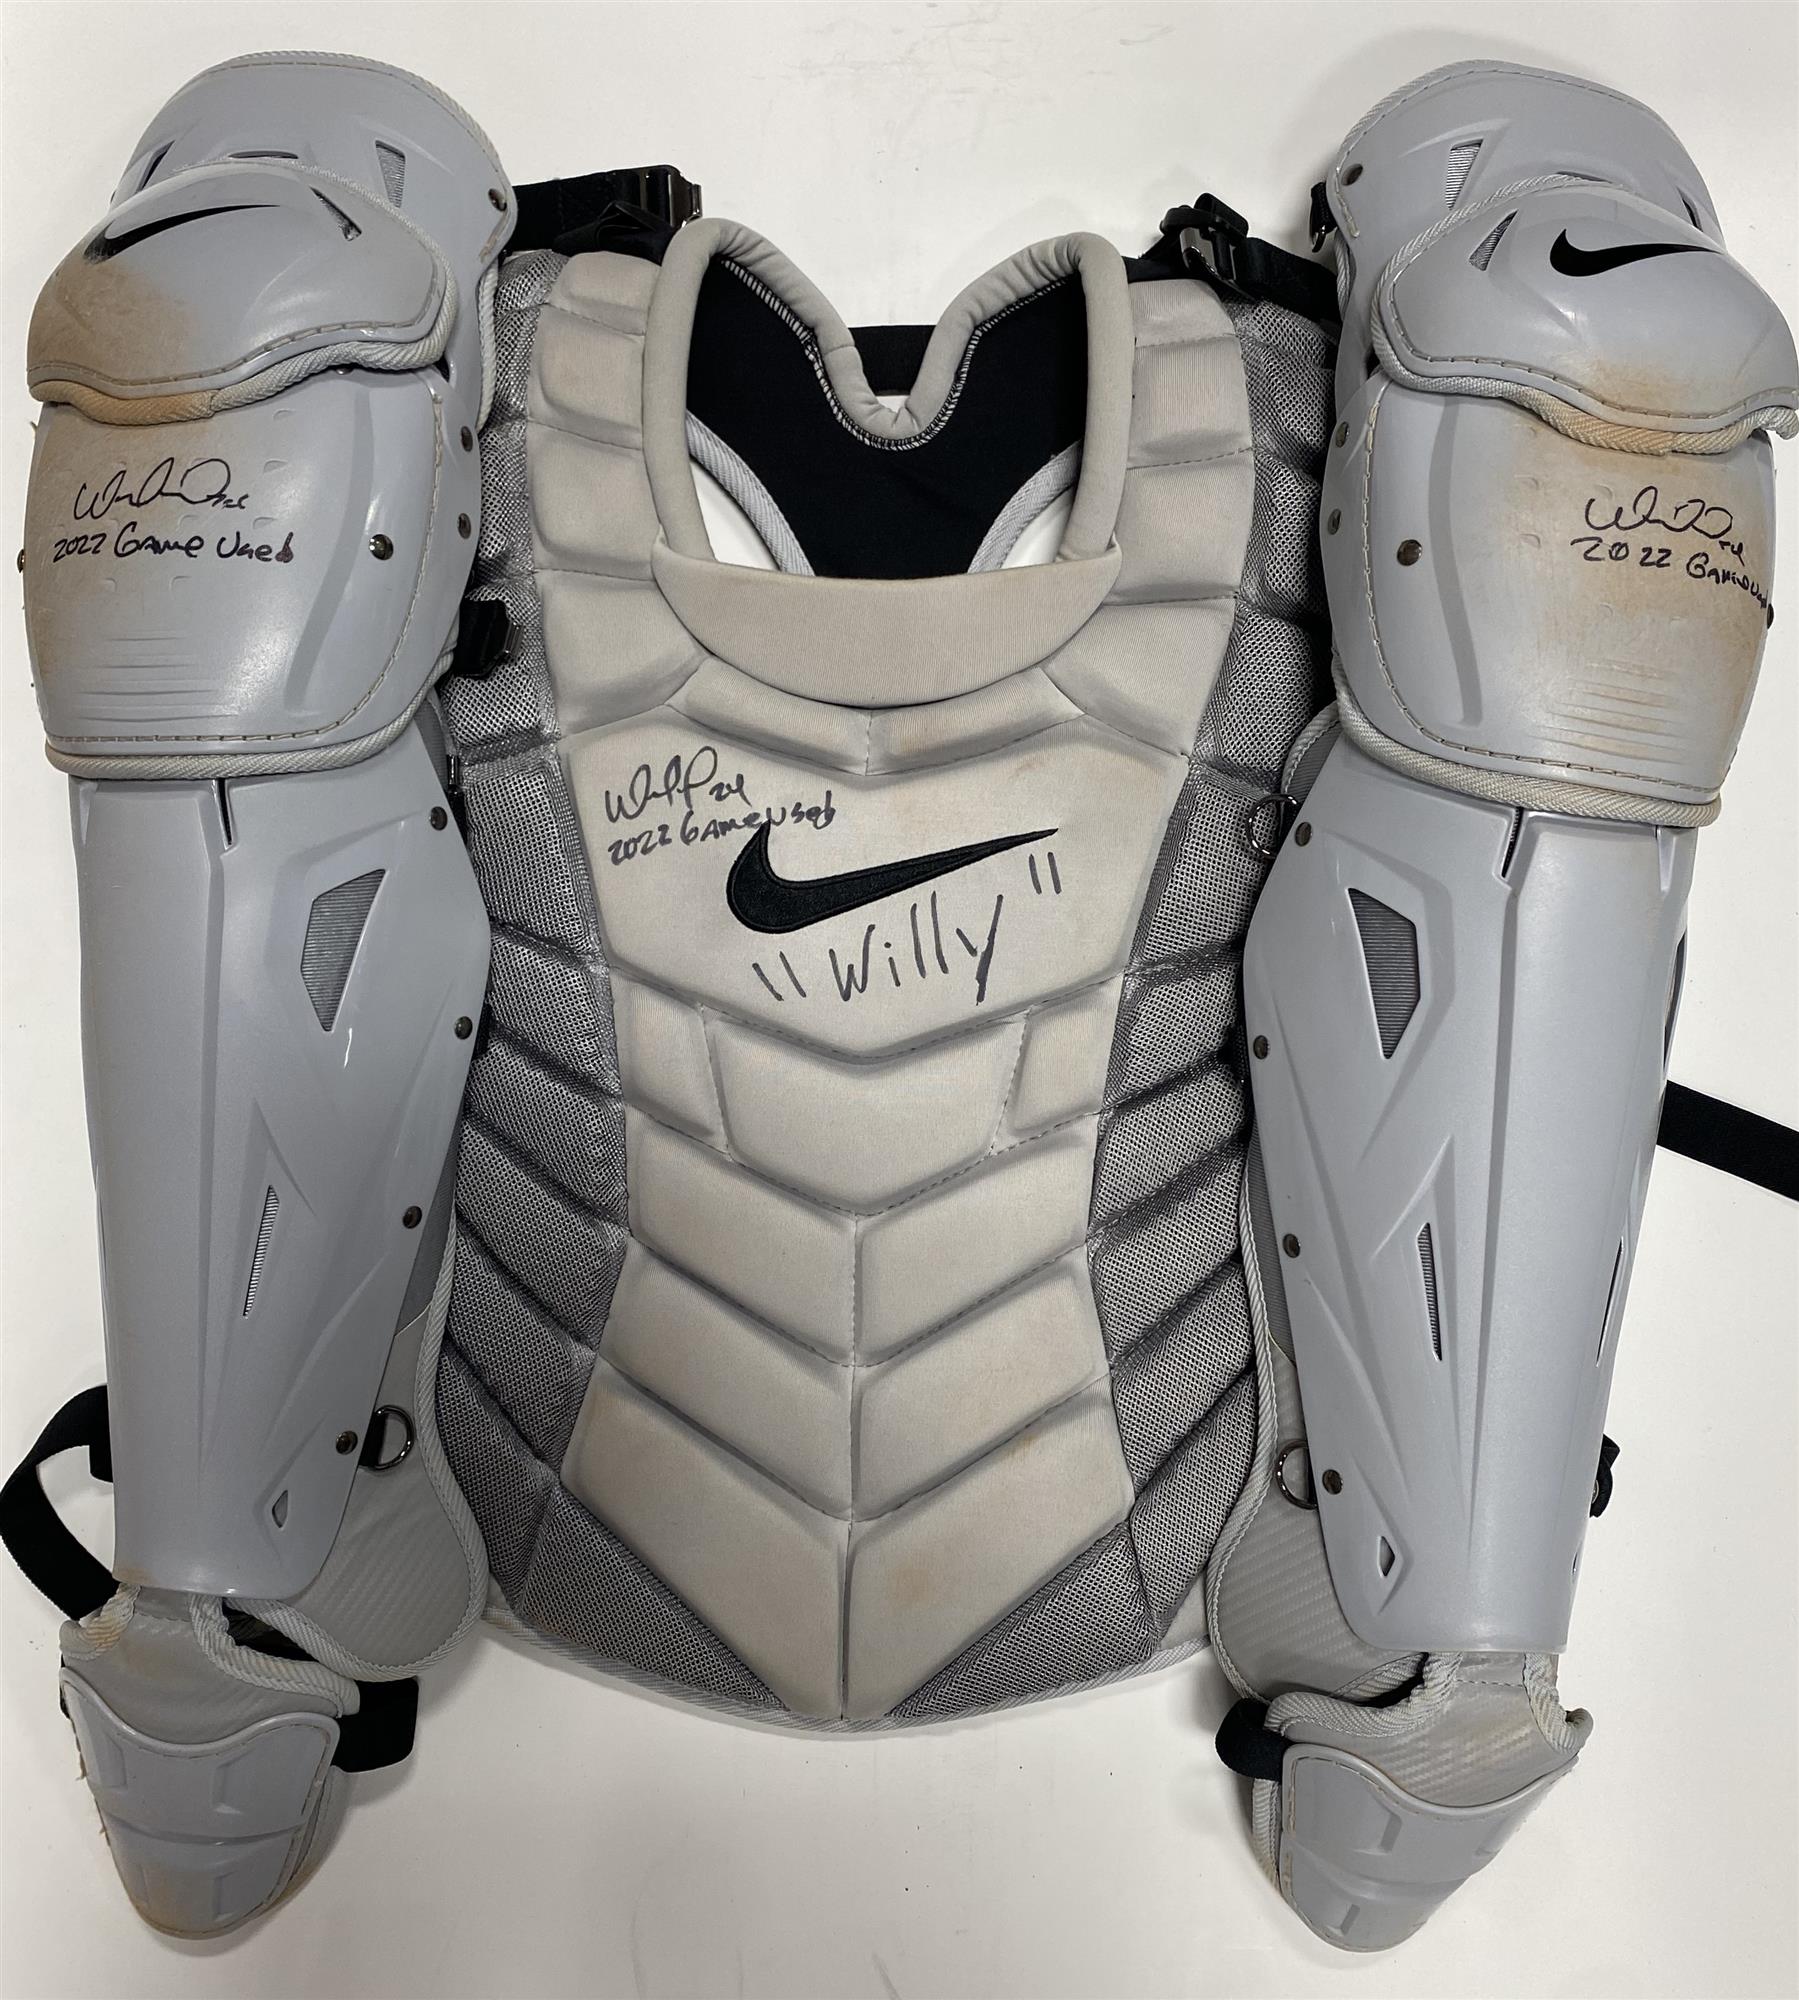 WILLIAM CONTRERAS SIGNED BRAVES 2022 GAME USED CATCHERS GEAR #1 - JSA